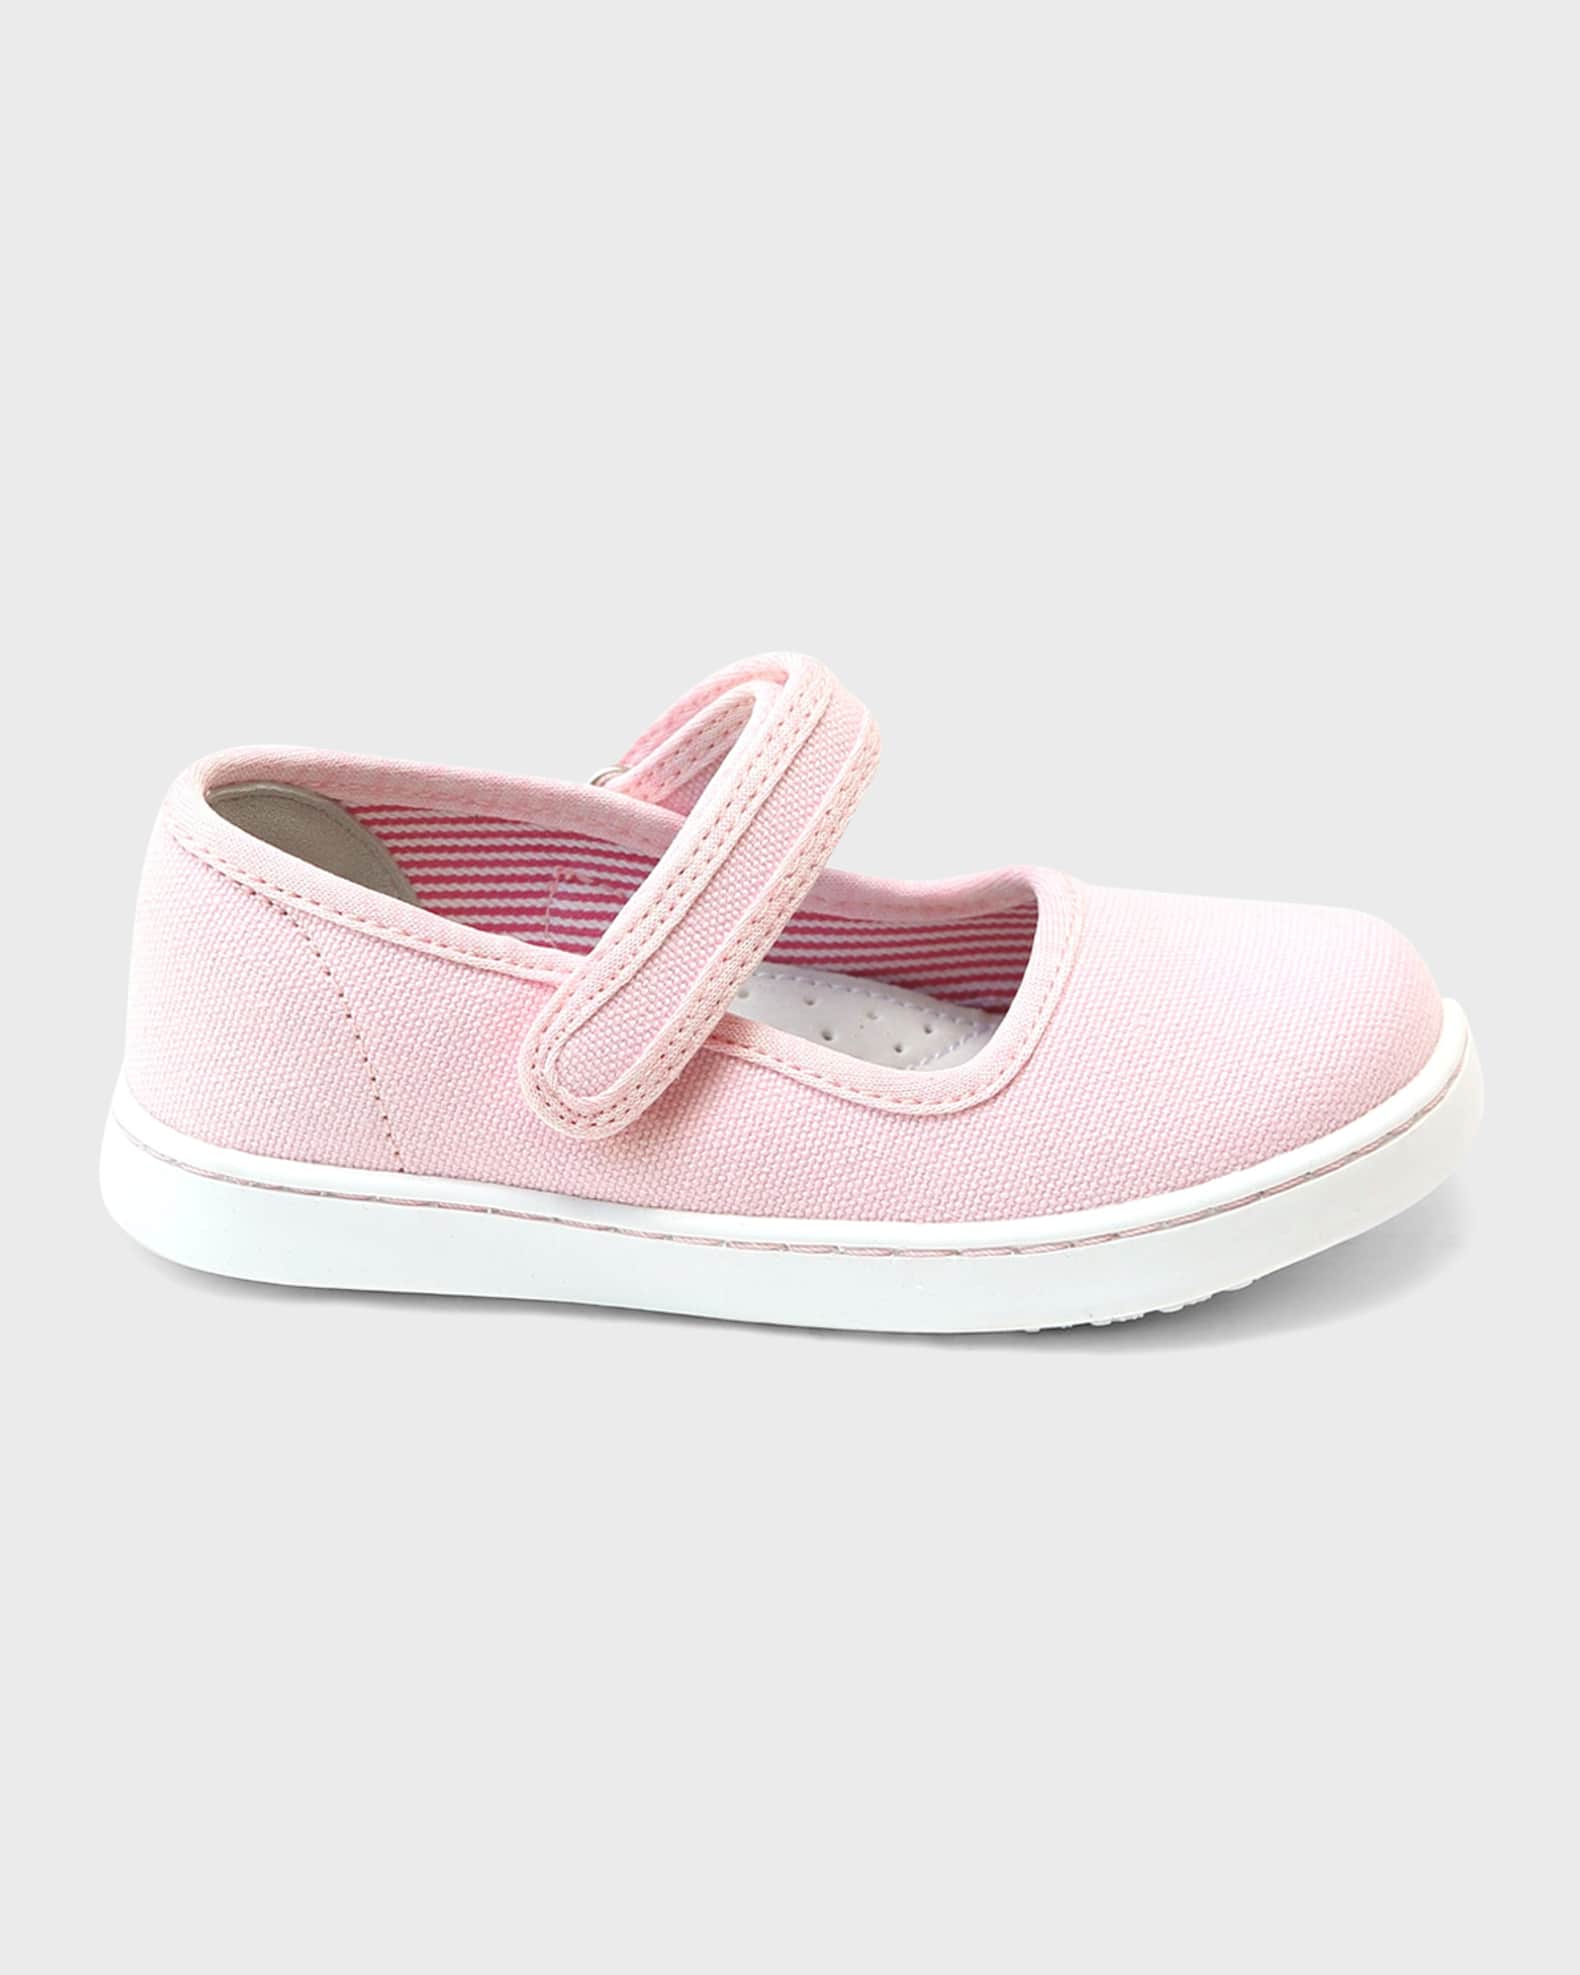 L'Amour Girl's Jenna Canvas Mary Jane Shoes, | Neiman